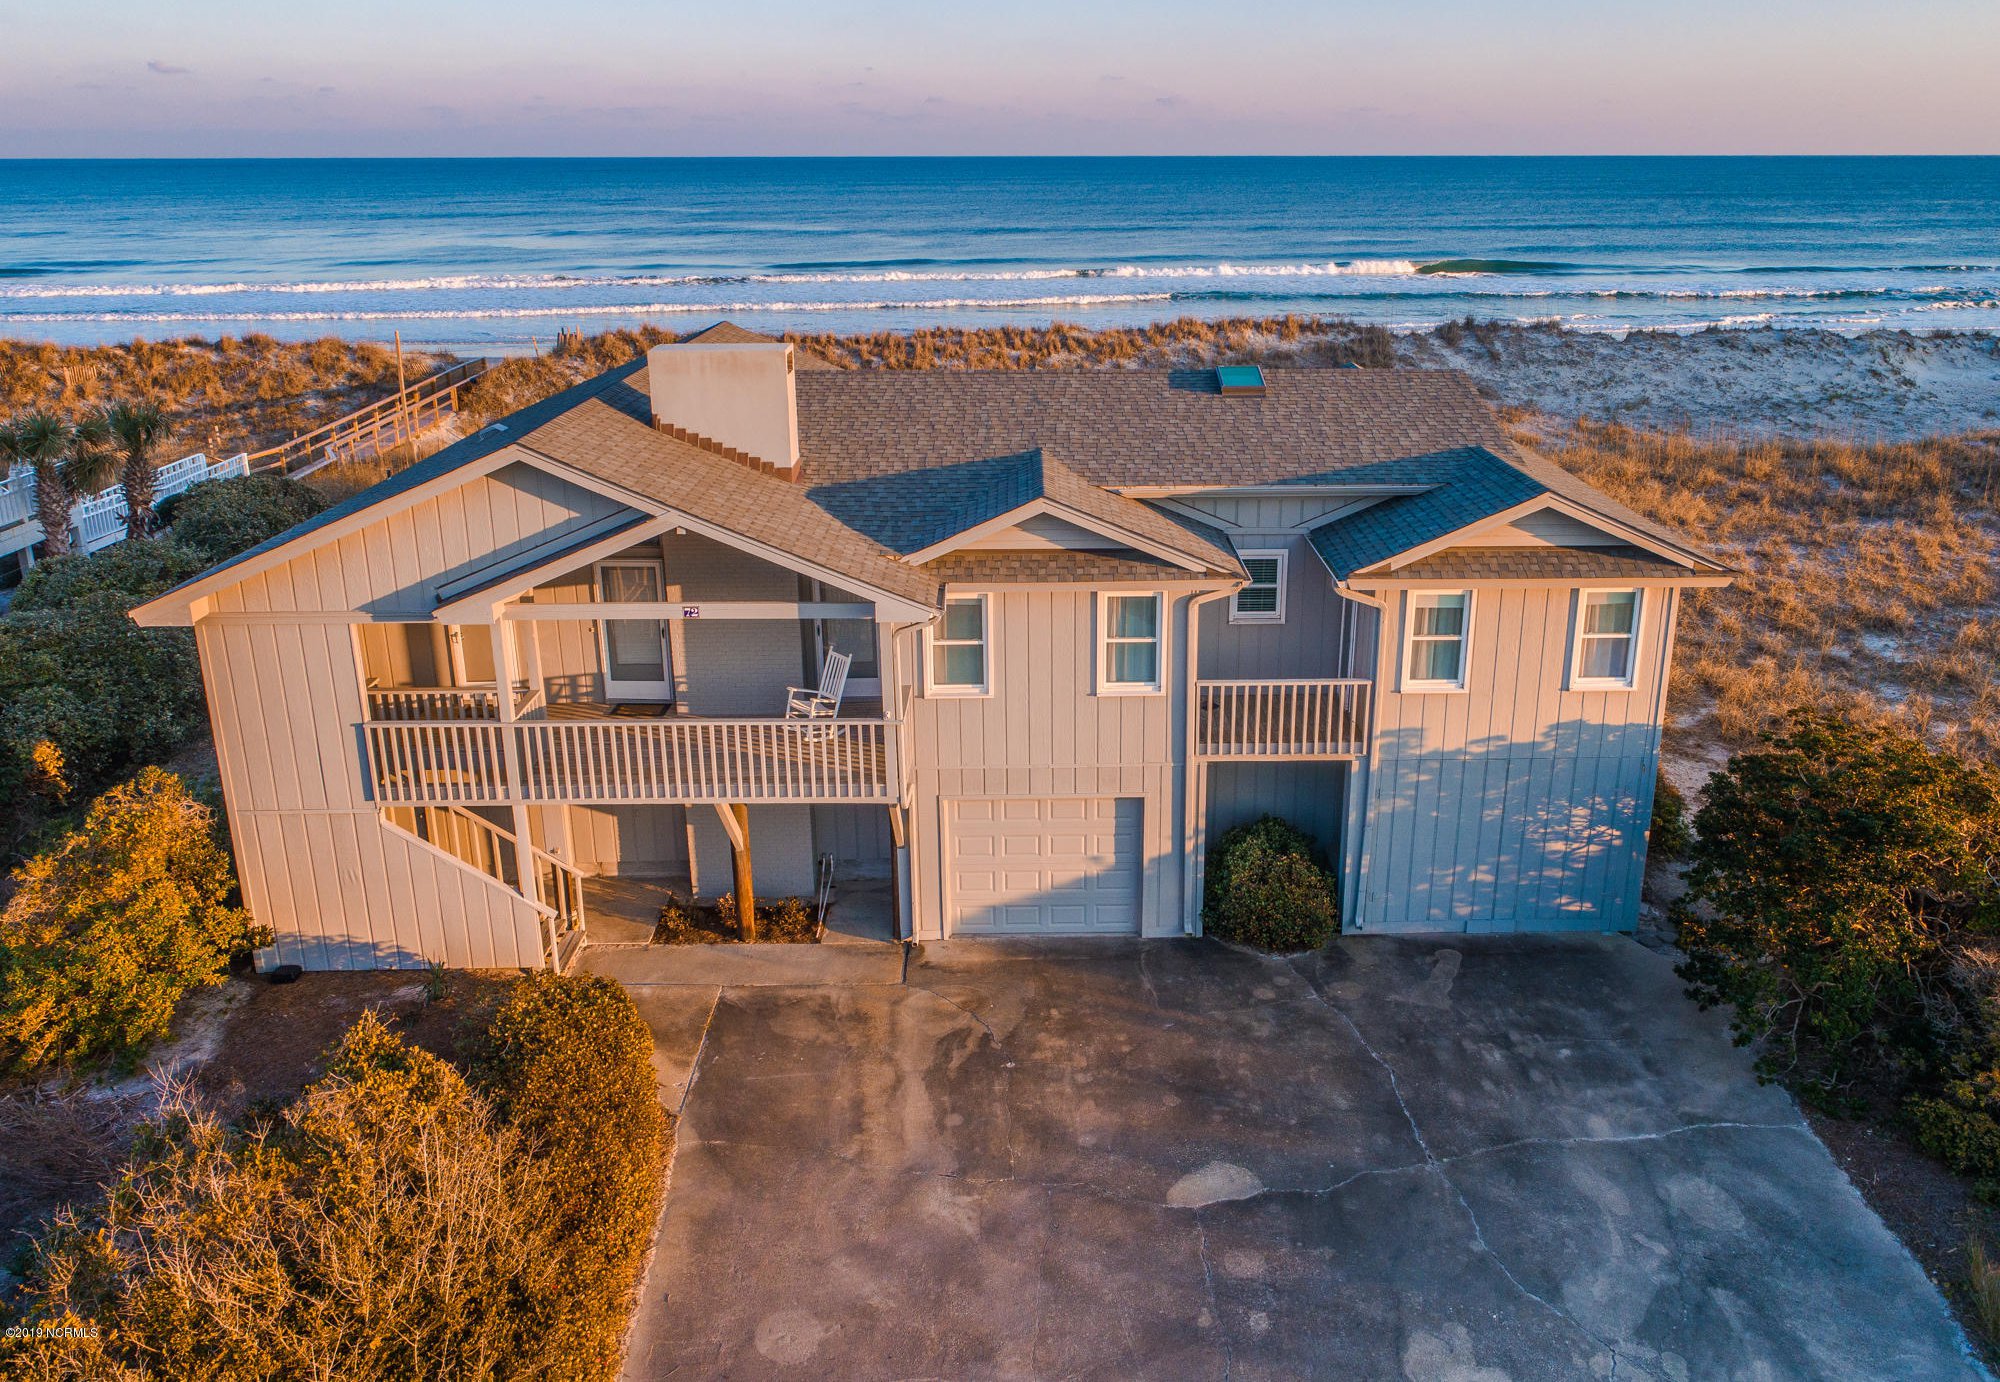 72 Beach Road S, Wilmington, NC 28411 Home for Sale